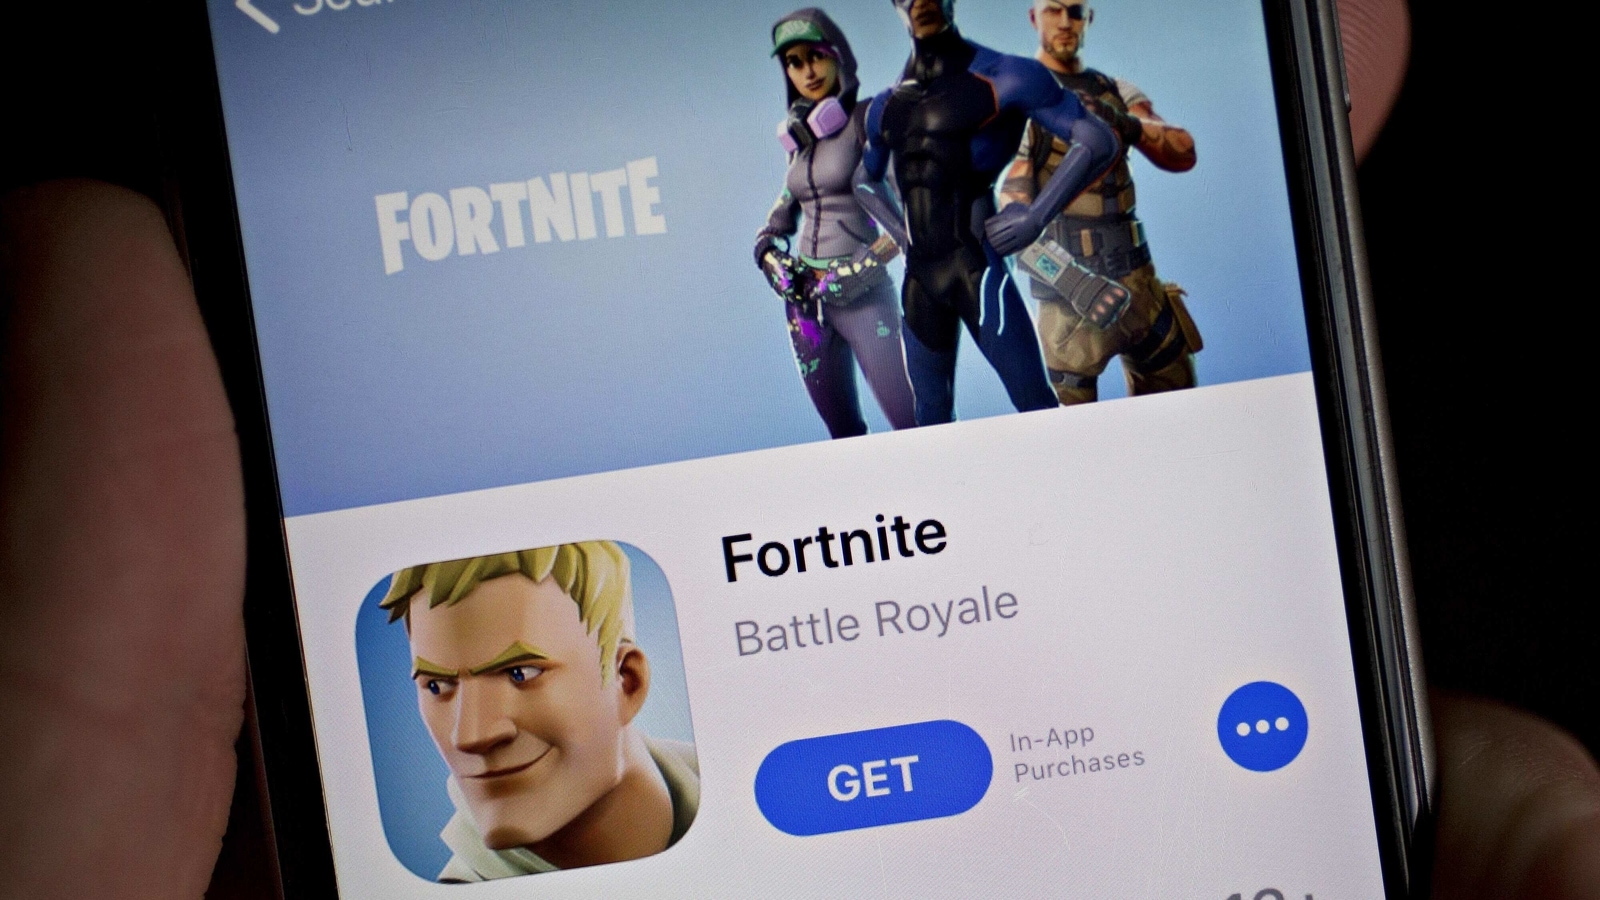 Hundreds of iPhones With Fortnite Installed Flood  - MacRumors